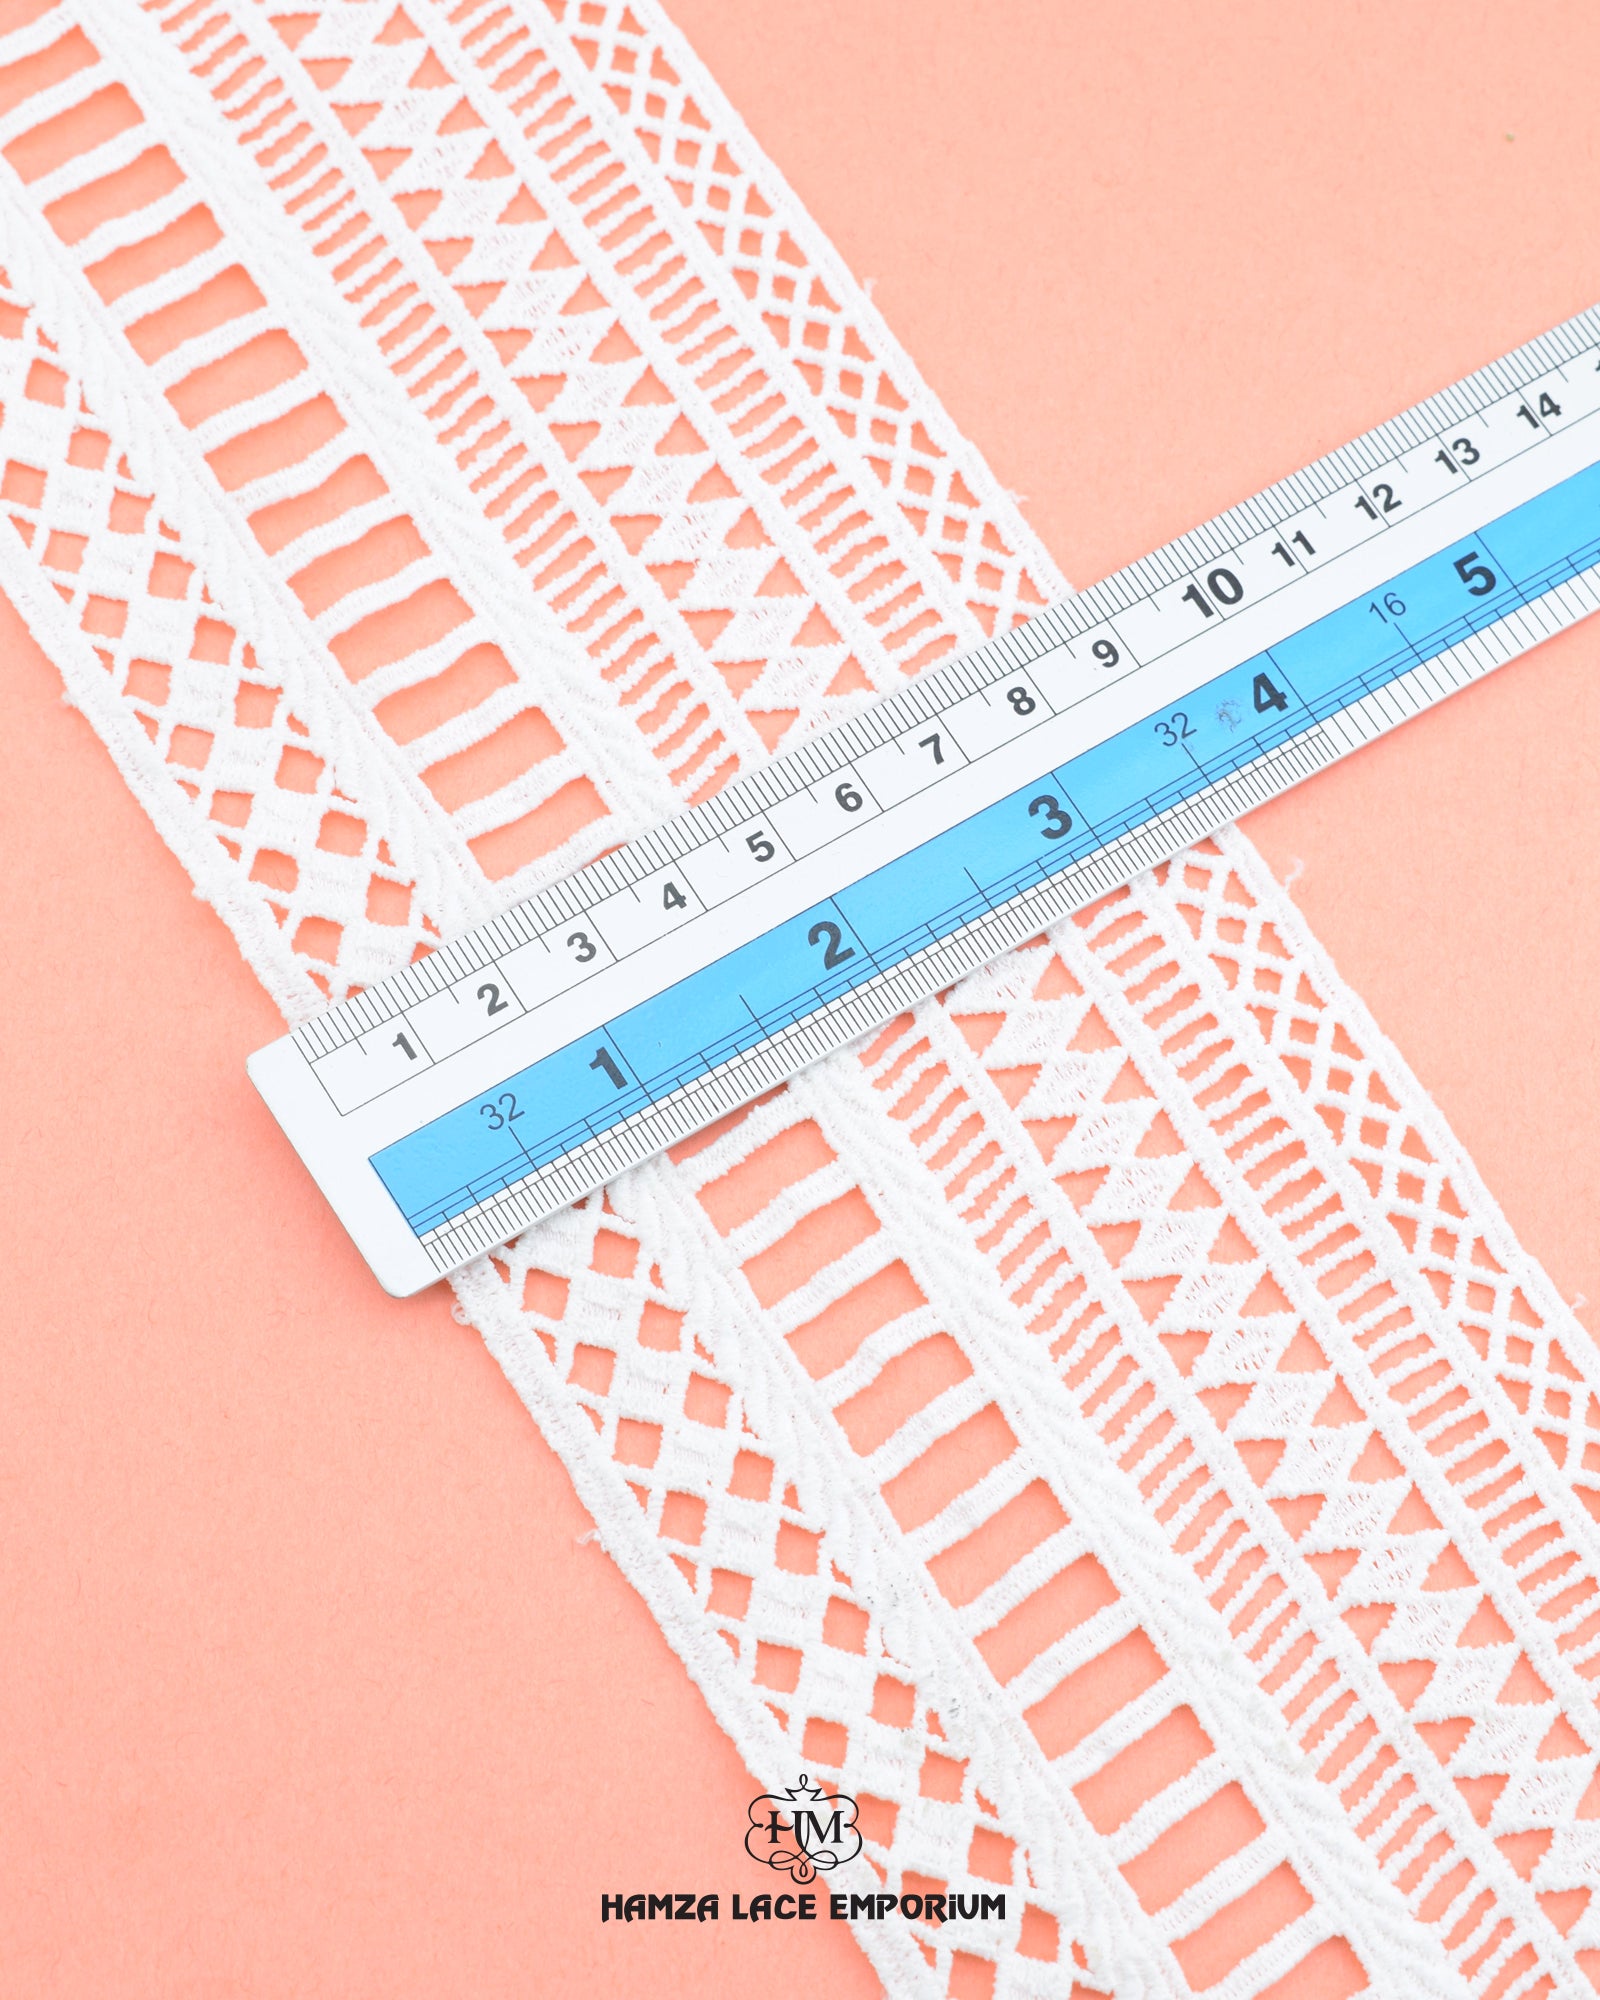 A ruler is showing the size of the 'Center Filling Lace 22656' as 3.5 inch